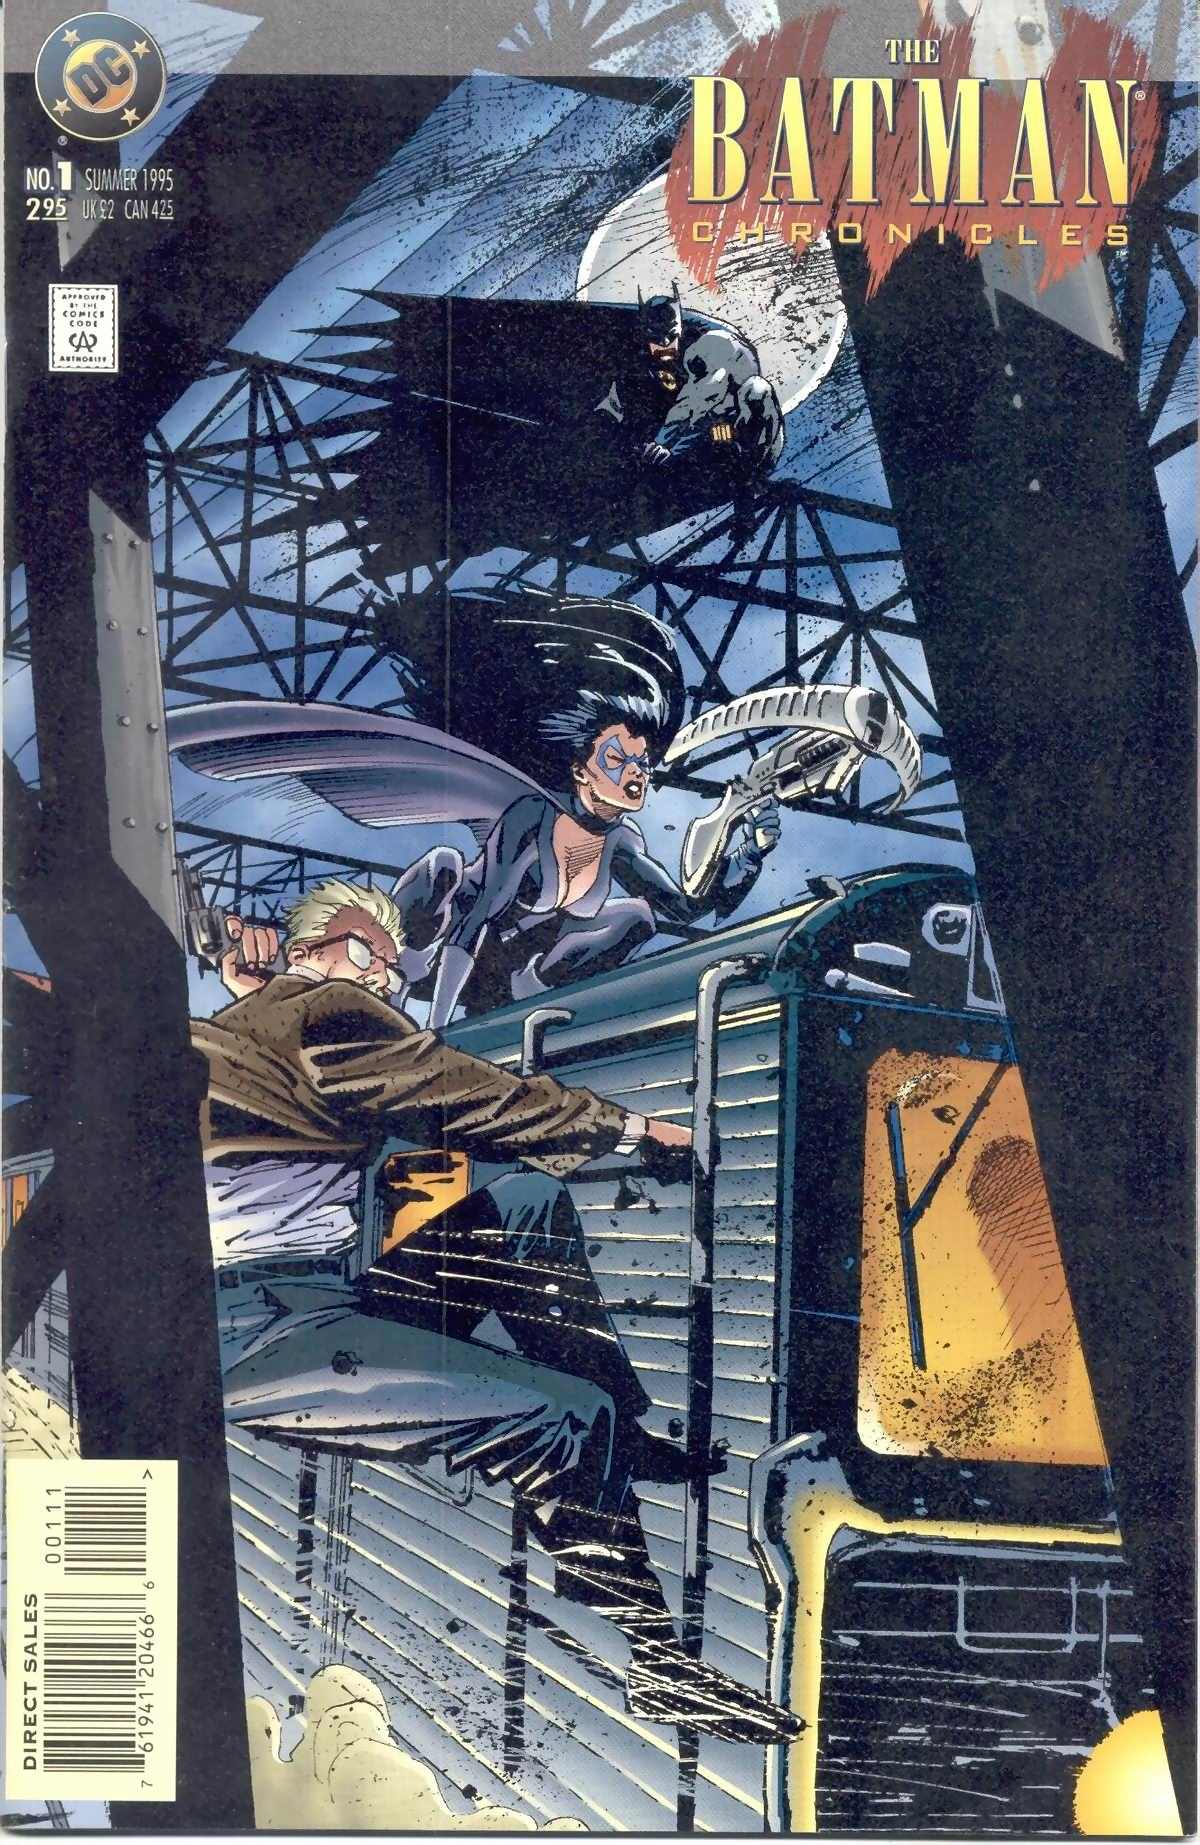 Read Comics Online Free - Batman Chronicles (1997) Comic Book Issue #001 -  Page 1